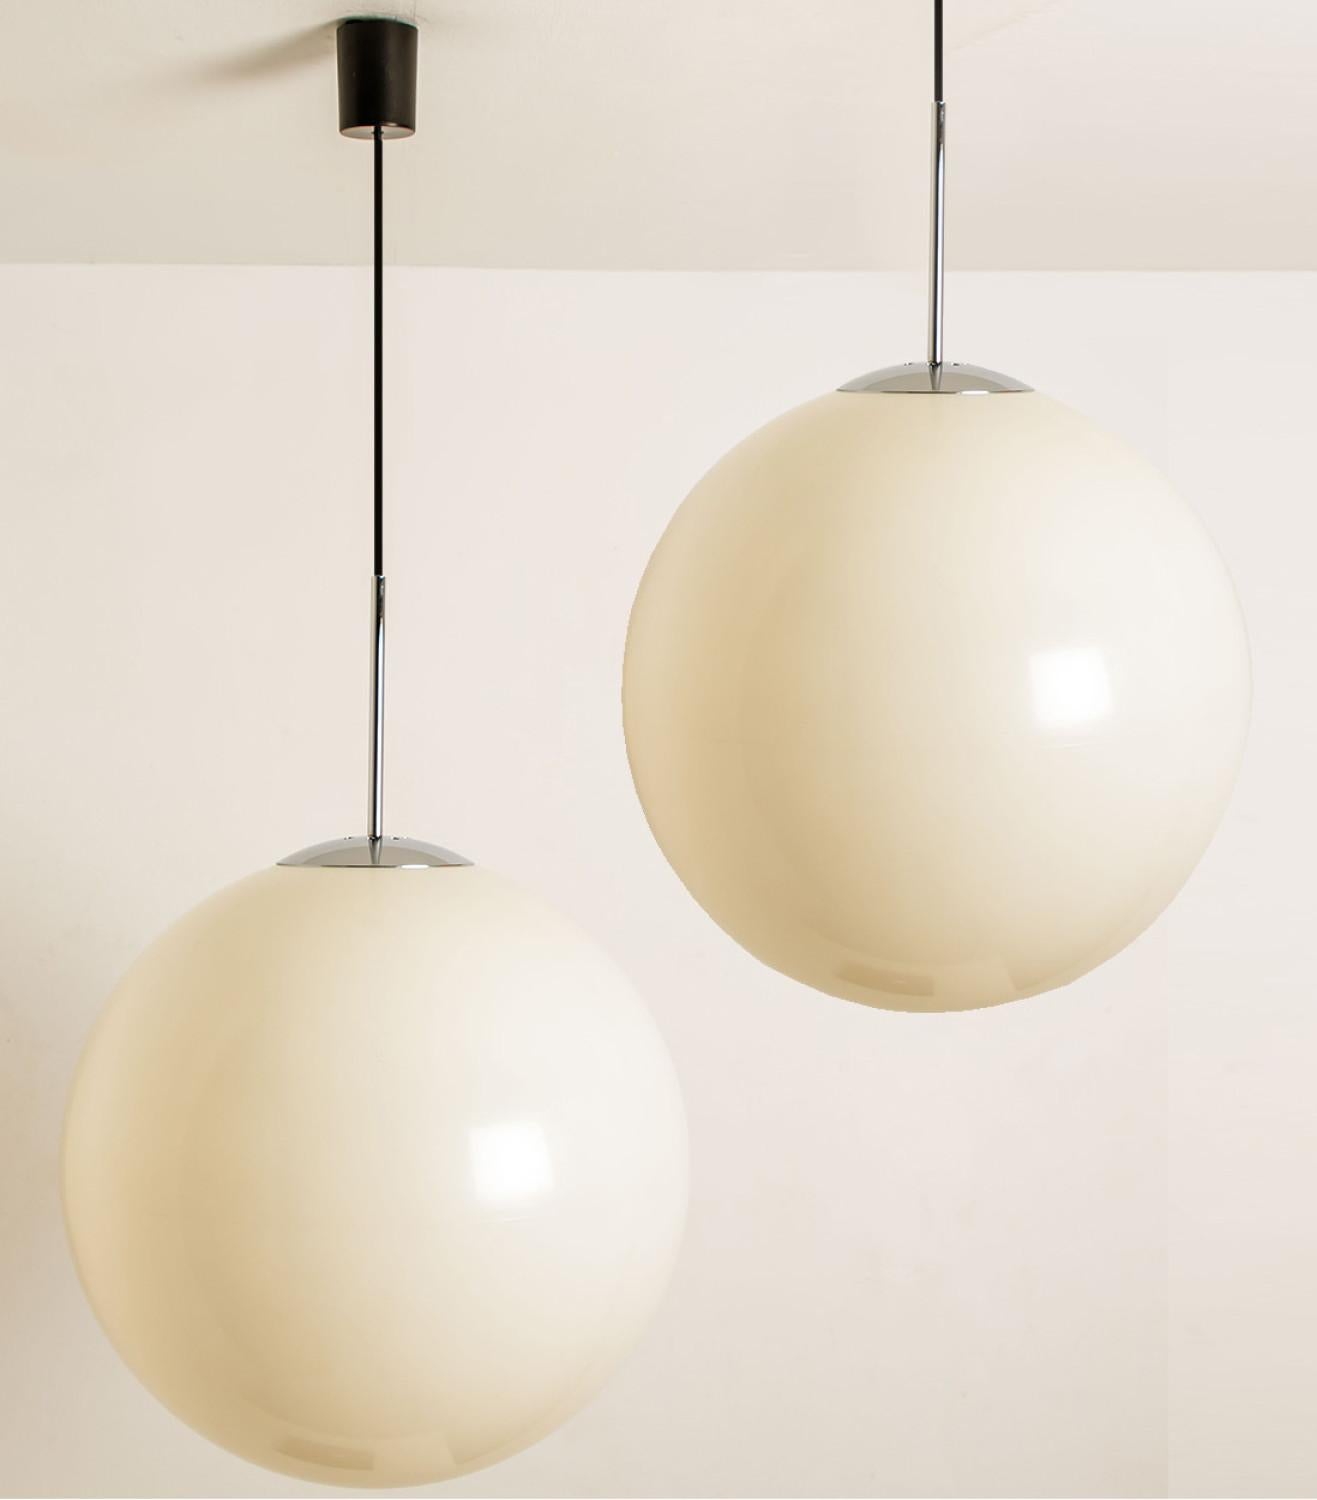 Two large ball pendant lamps by Philips original from the 1970s.
In excellent vintage condition.
The bulb is plastic (normal users tracks) and the fixture is made of solid chrome.
Very solid quality. Statement pieces.

The approximate